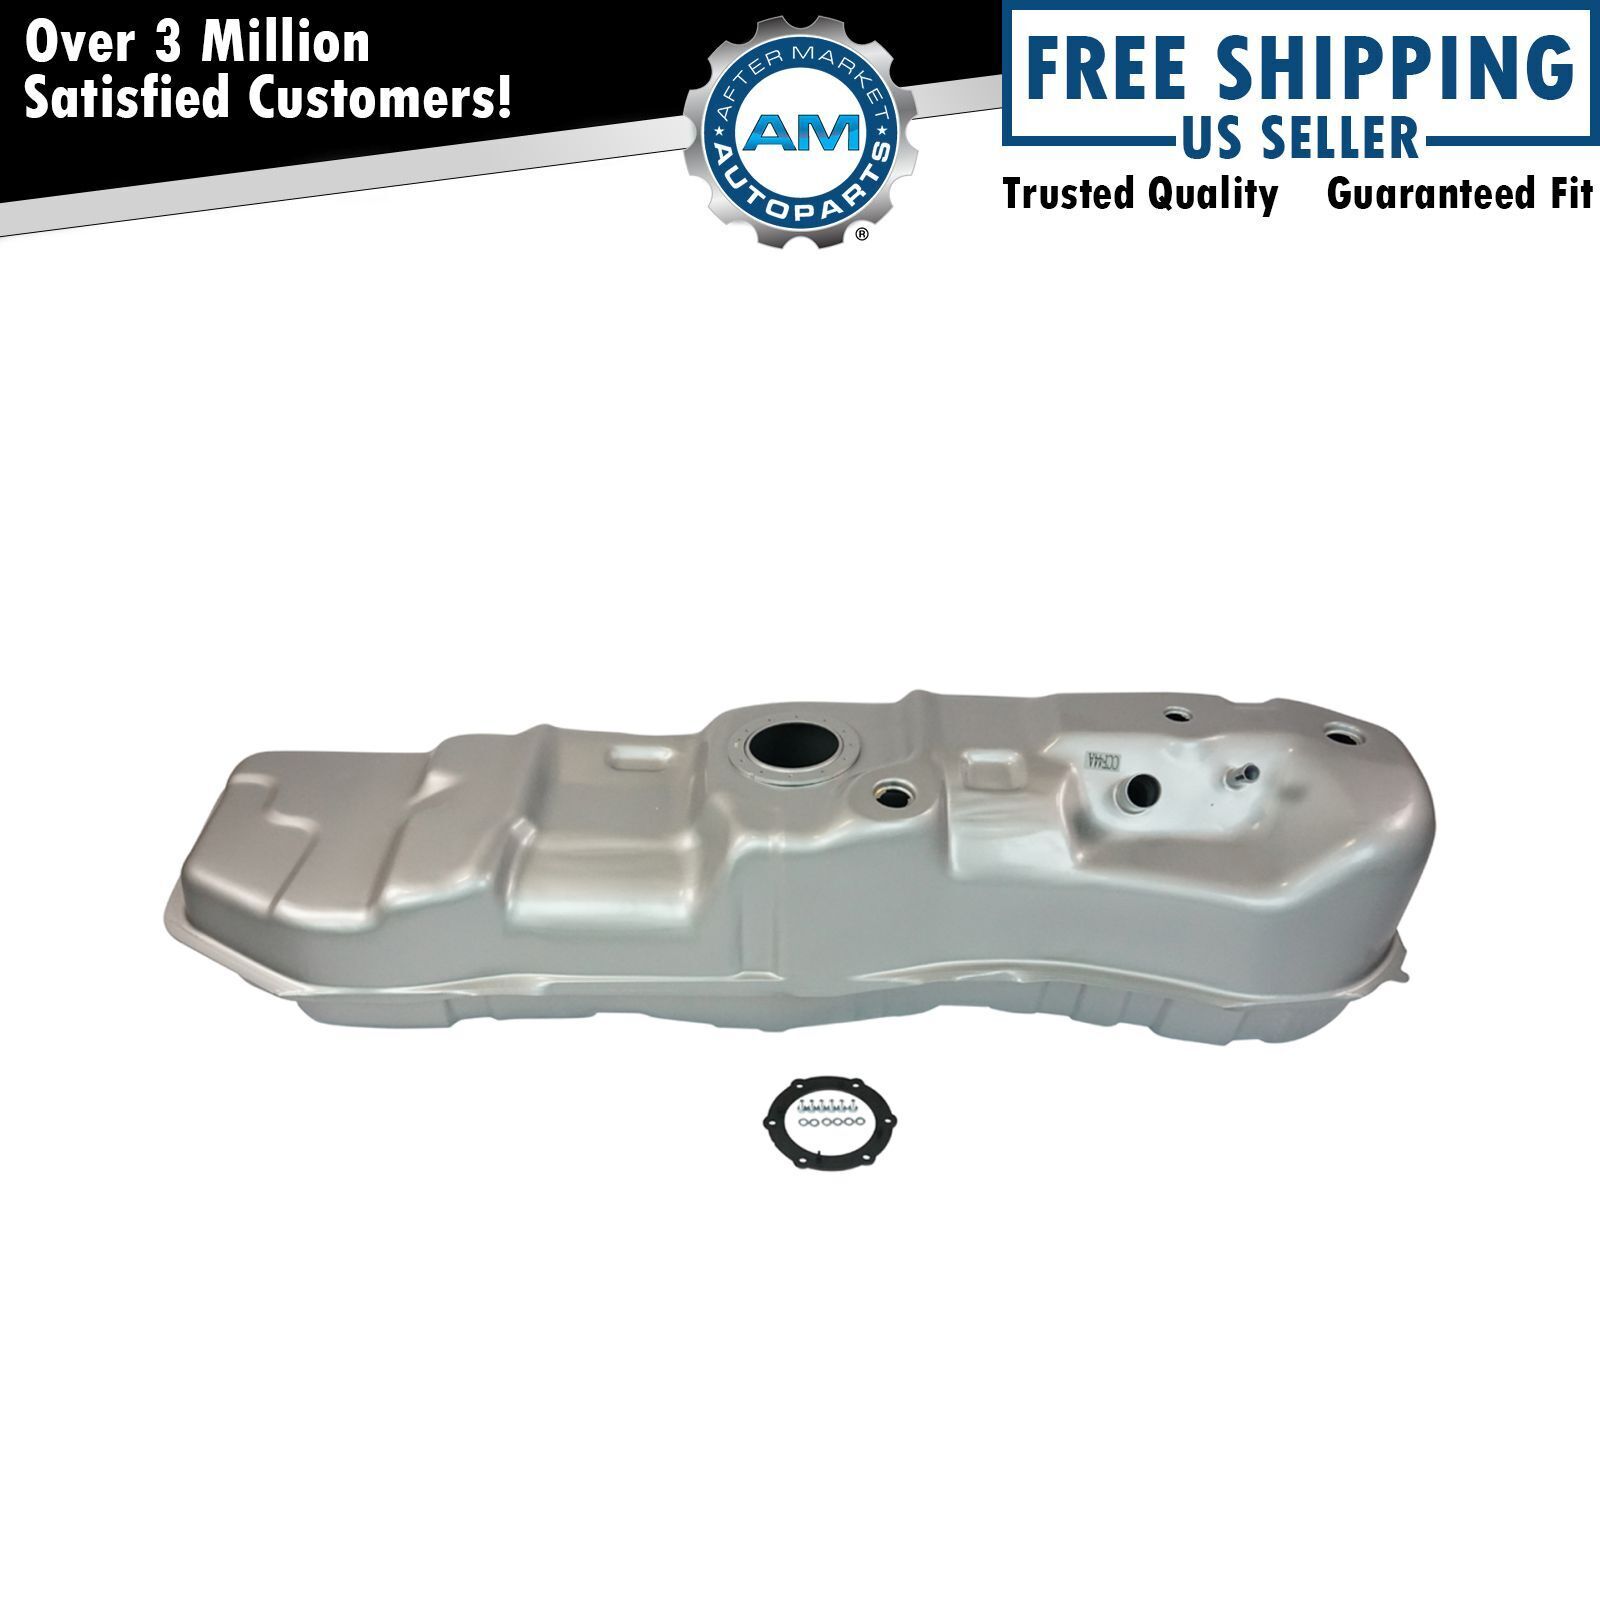 Fuel Gas Tank 24.5 Gallon NEW for 97-98 Ford F-Series Pickup Truck w/ 6.5 Bed